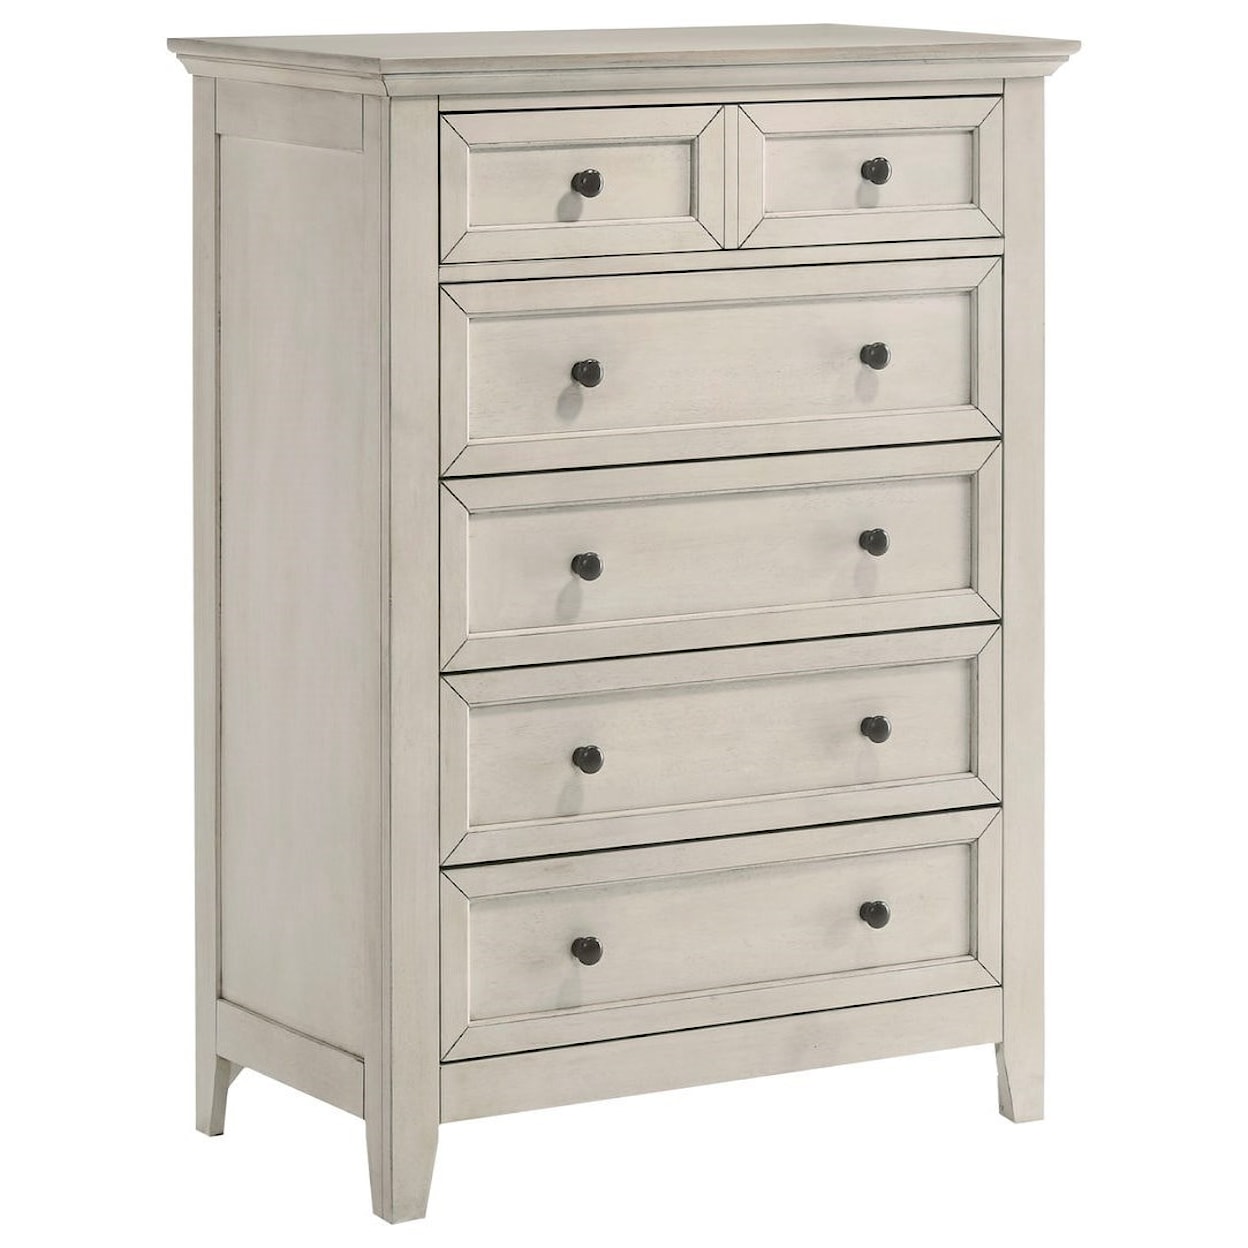 Belfort Select Mill Run Youth Chest of Drawers